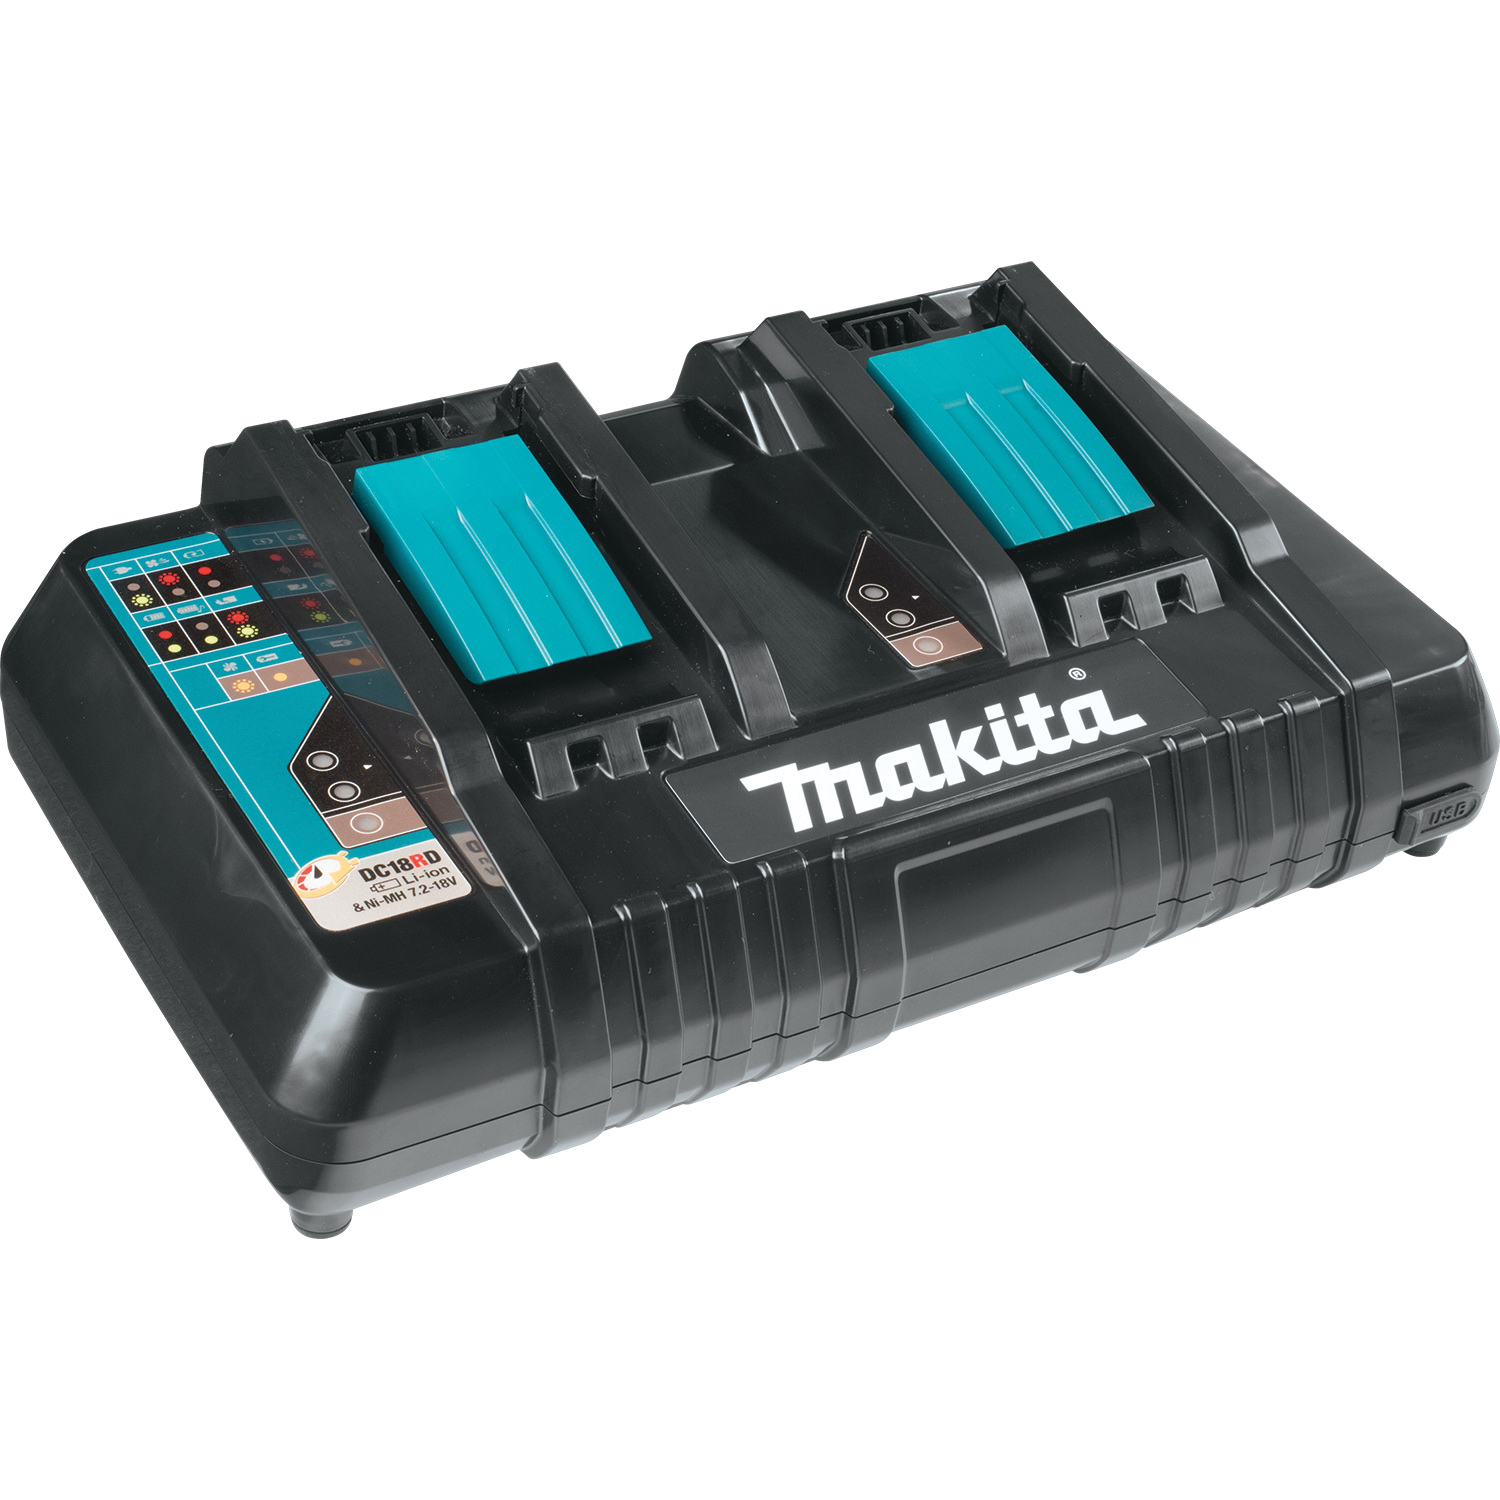 DC18RD Dual Port Battery Charger, 120 VAC Input, 14.4, 18 V Output, 2 to 6 Ah, Battery Included: No